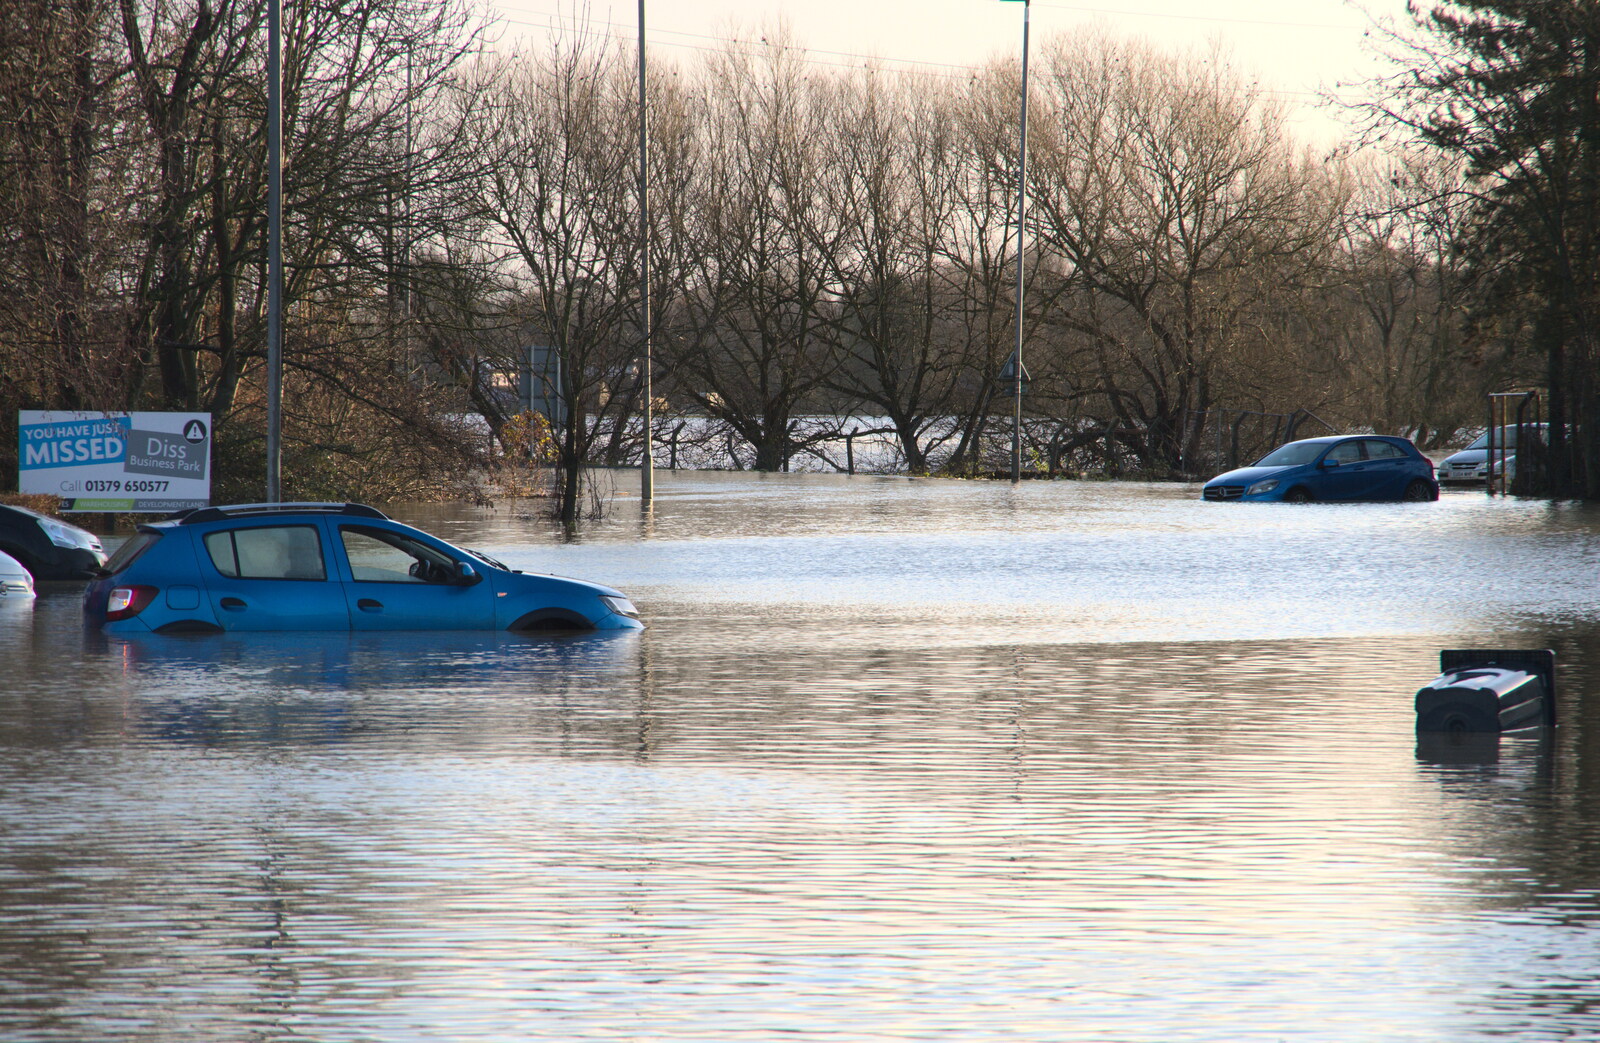 Abandoned cars and a floating wheelie bin from The Christmas Eve Floods, Diss, Norfolk - 24th December 2020